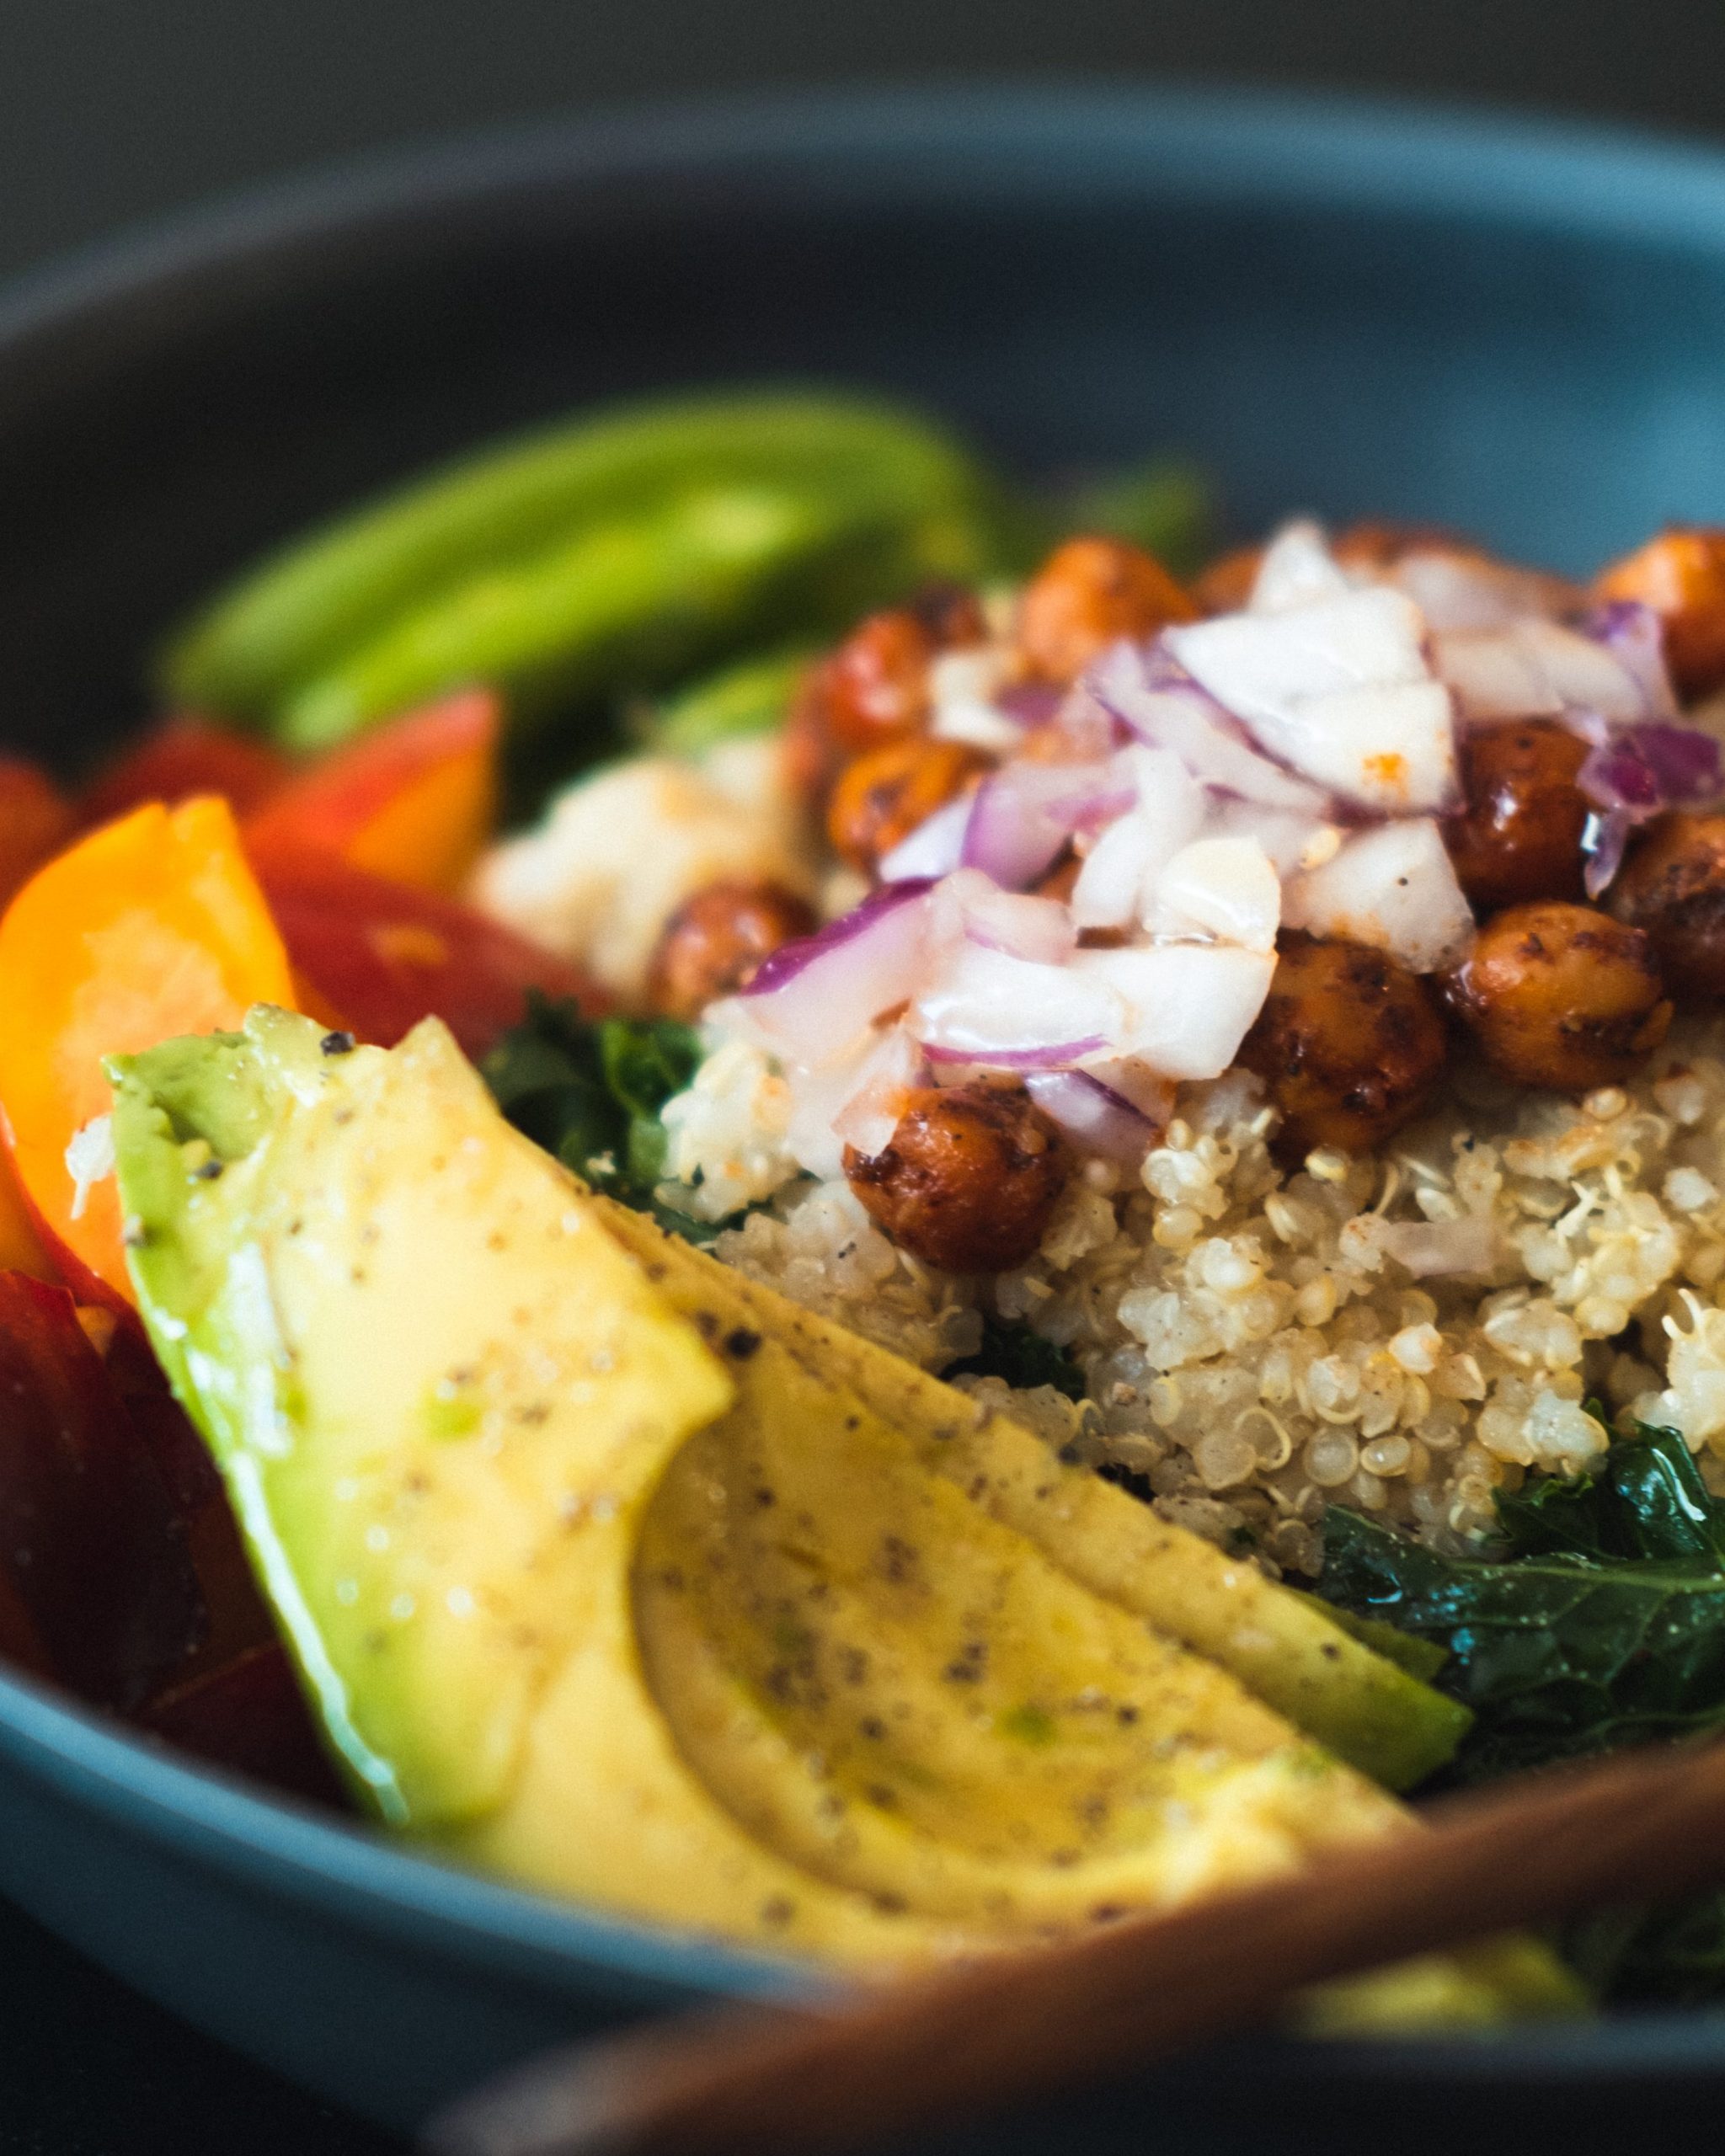 Quinoa bowl with chickpeas, bok choy, sweet potatoes, onions and avocados